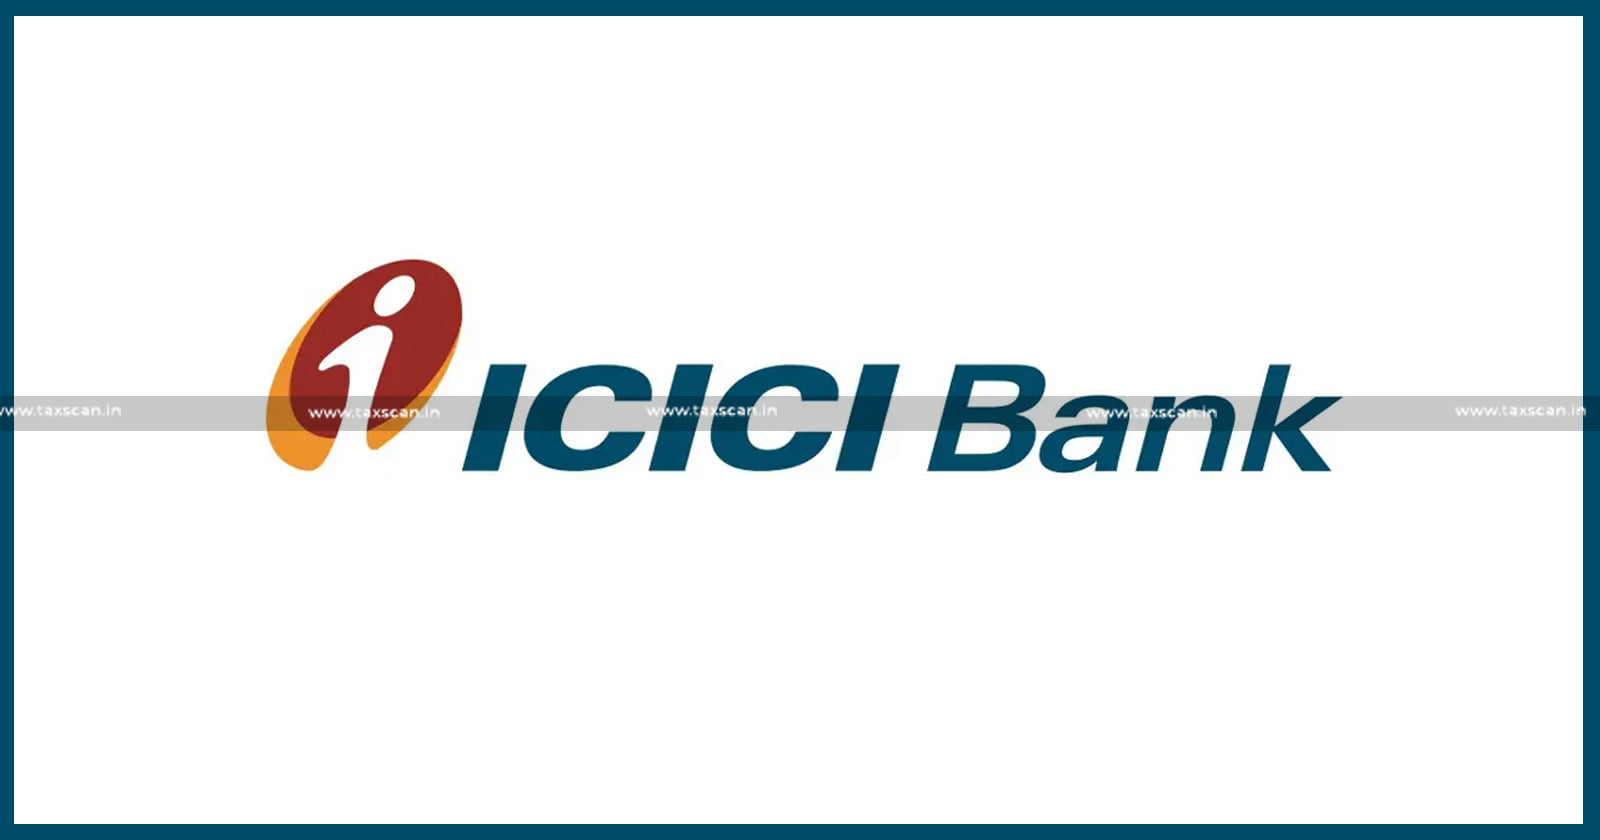 Penalty - Penalty leviable - Account - Disallowance - Income Tax Act - Proper Filing of ROI - ROI - ITAT Grants Relief to ICICI Bank - ICICI Bank - Relief to ICICI Bank - ITAT - Income Tax - Deleting Penalty - taxscan